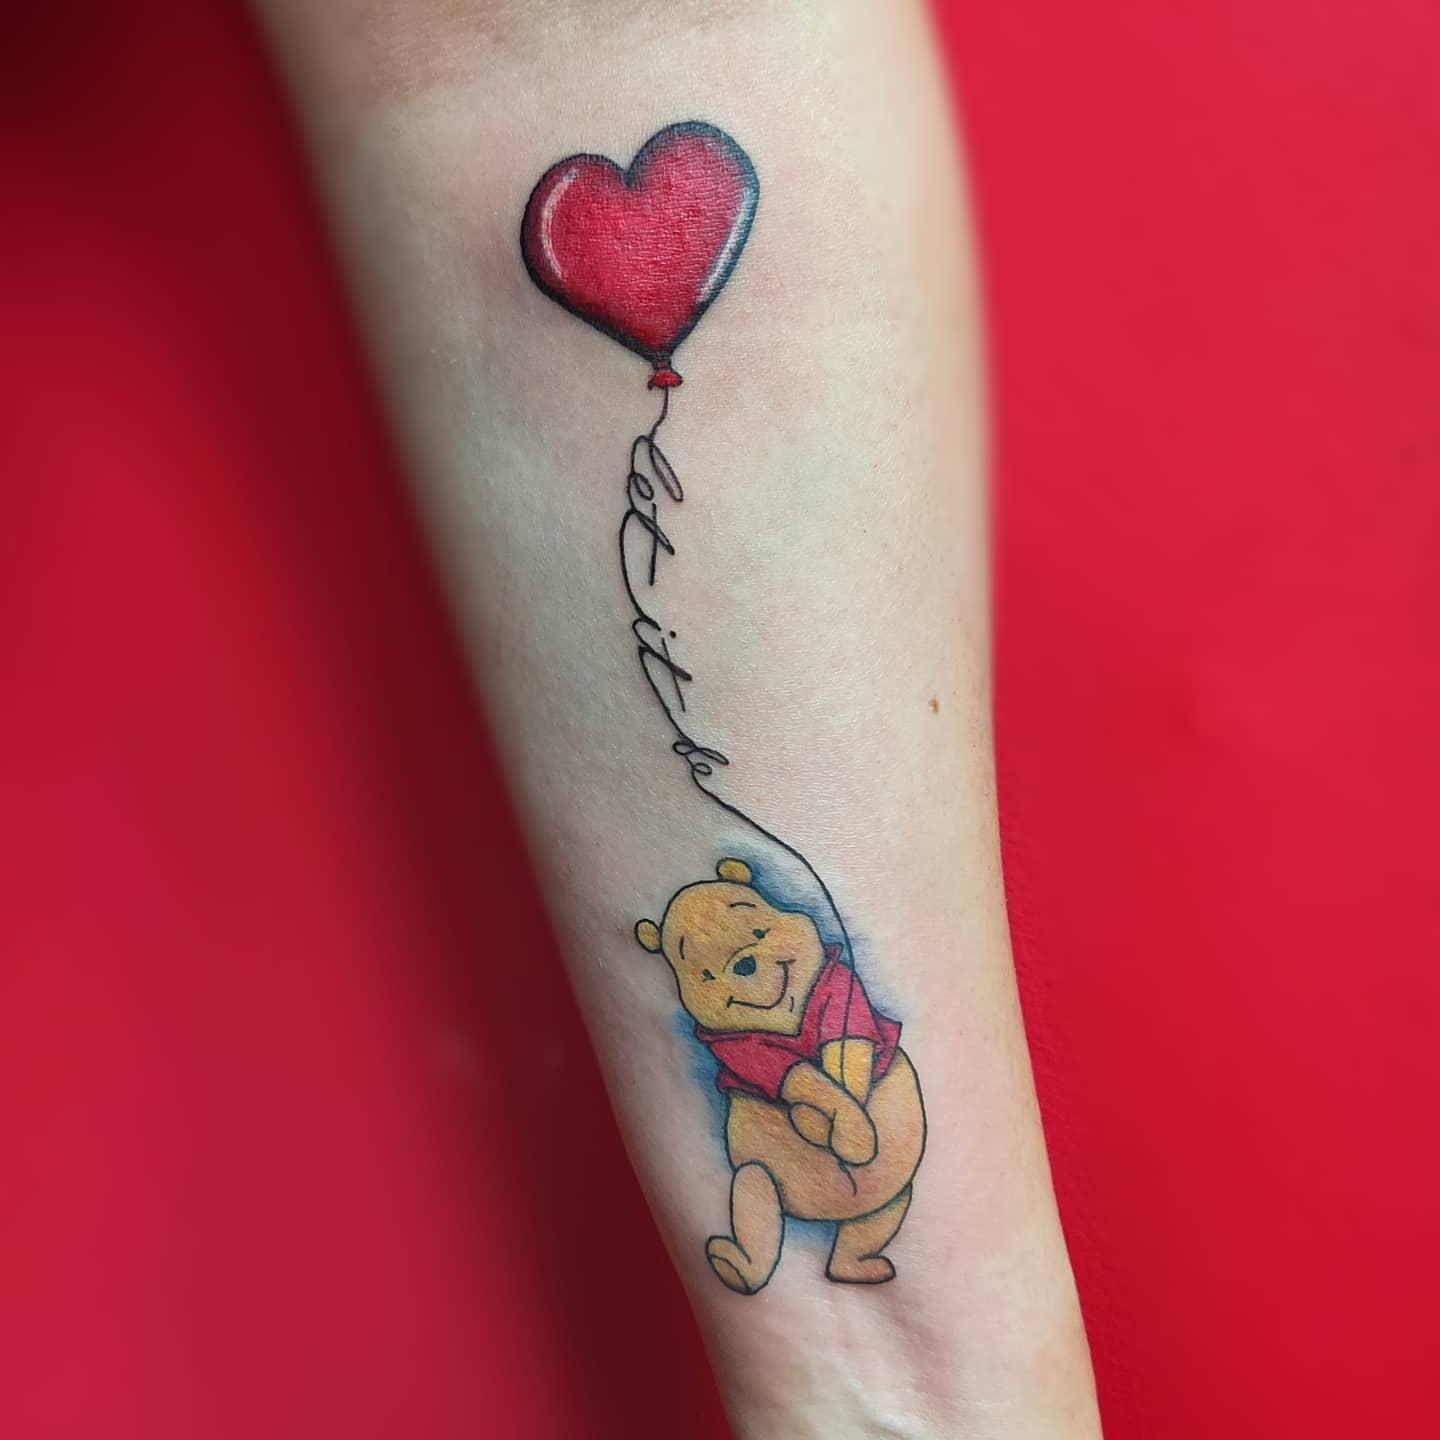 Winnie the Pooh quote tattoo tattoo quotes  Believe tattoos Think tattoo  Disney tattoos quotes